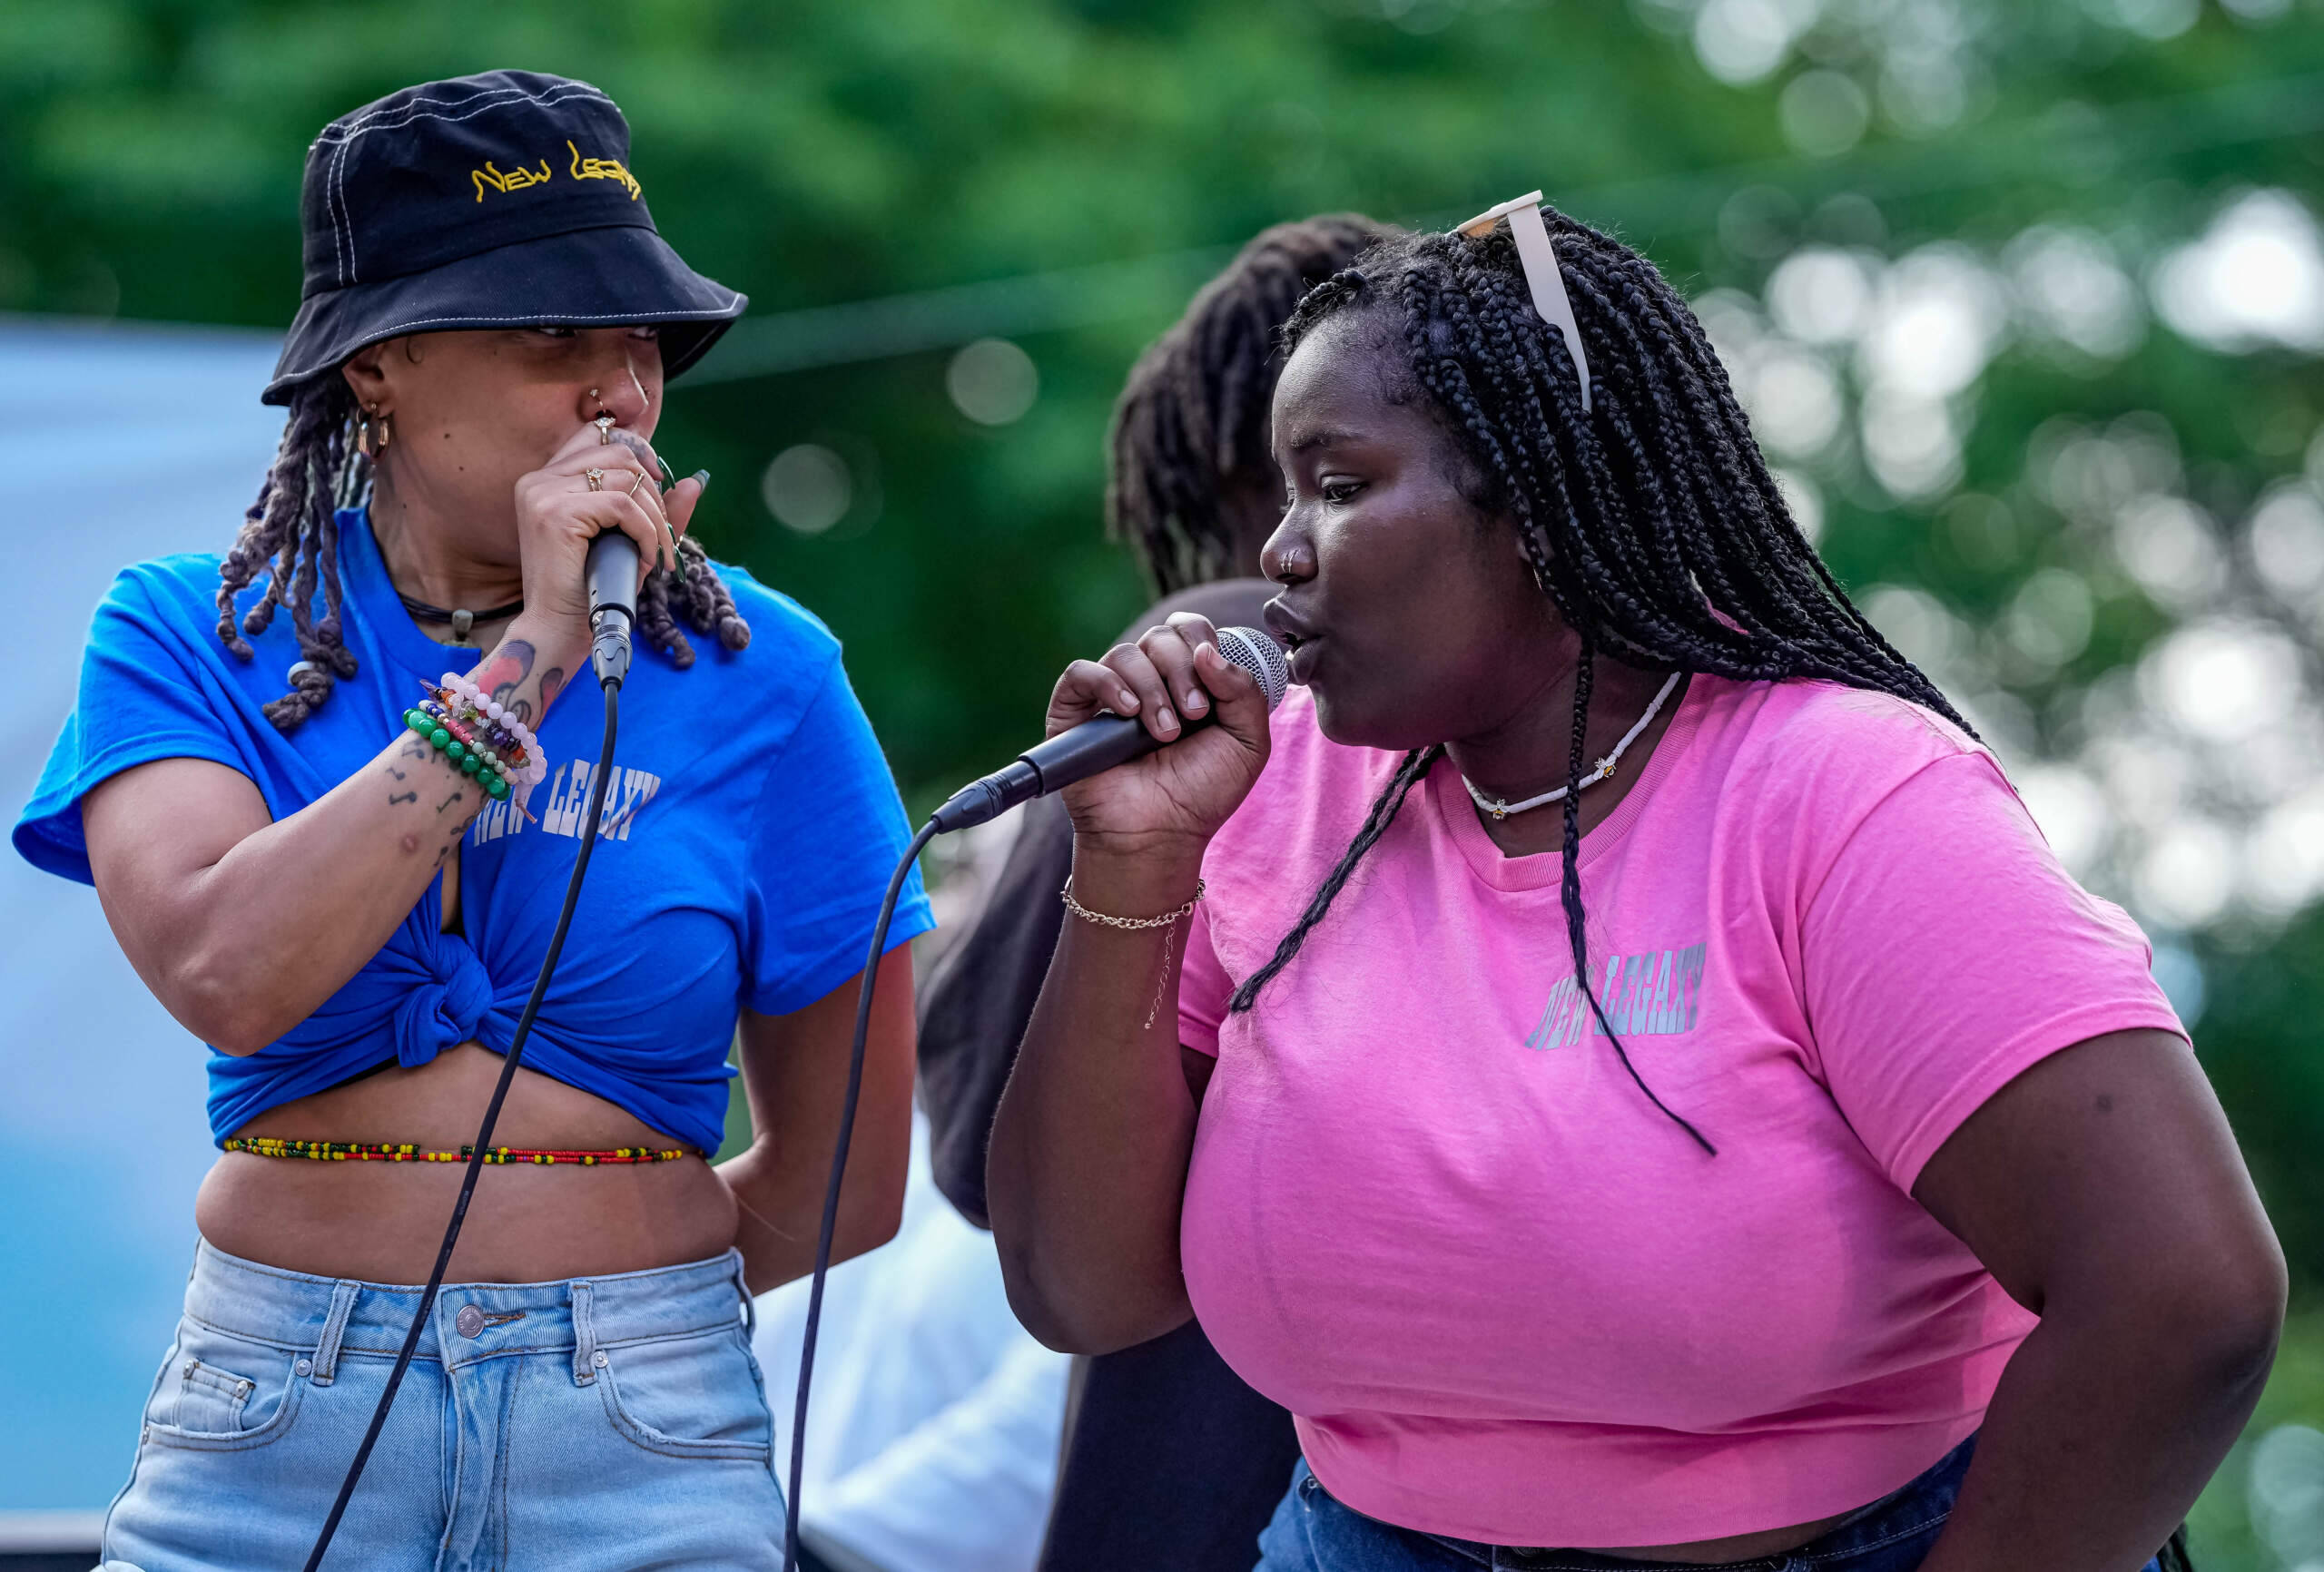 Two performers sing along at last year's festival. (Courtesy Charles River Jazz Festival)